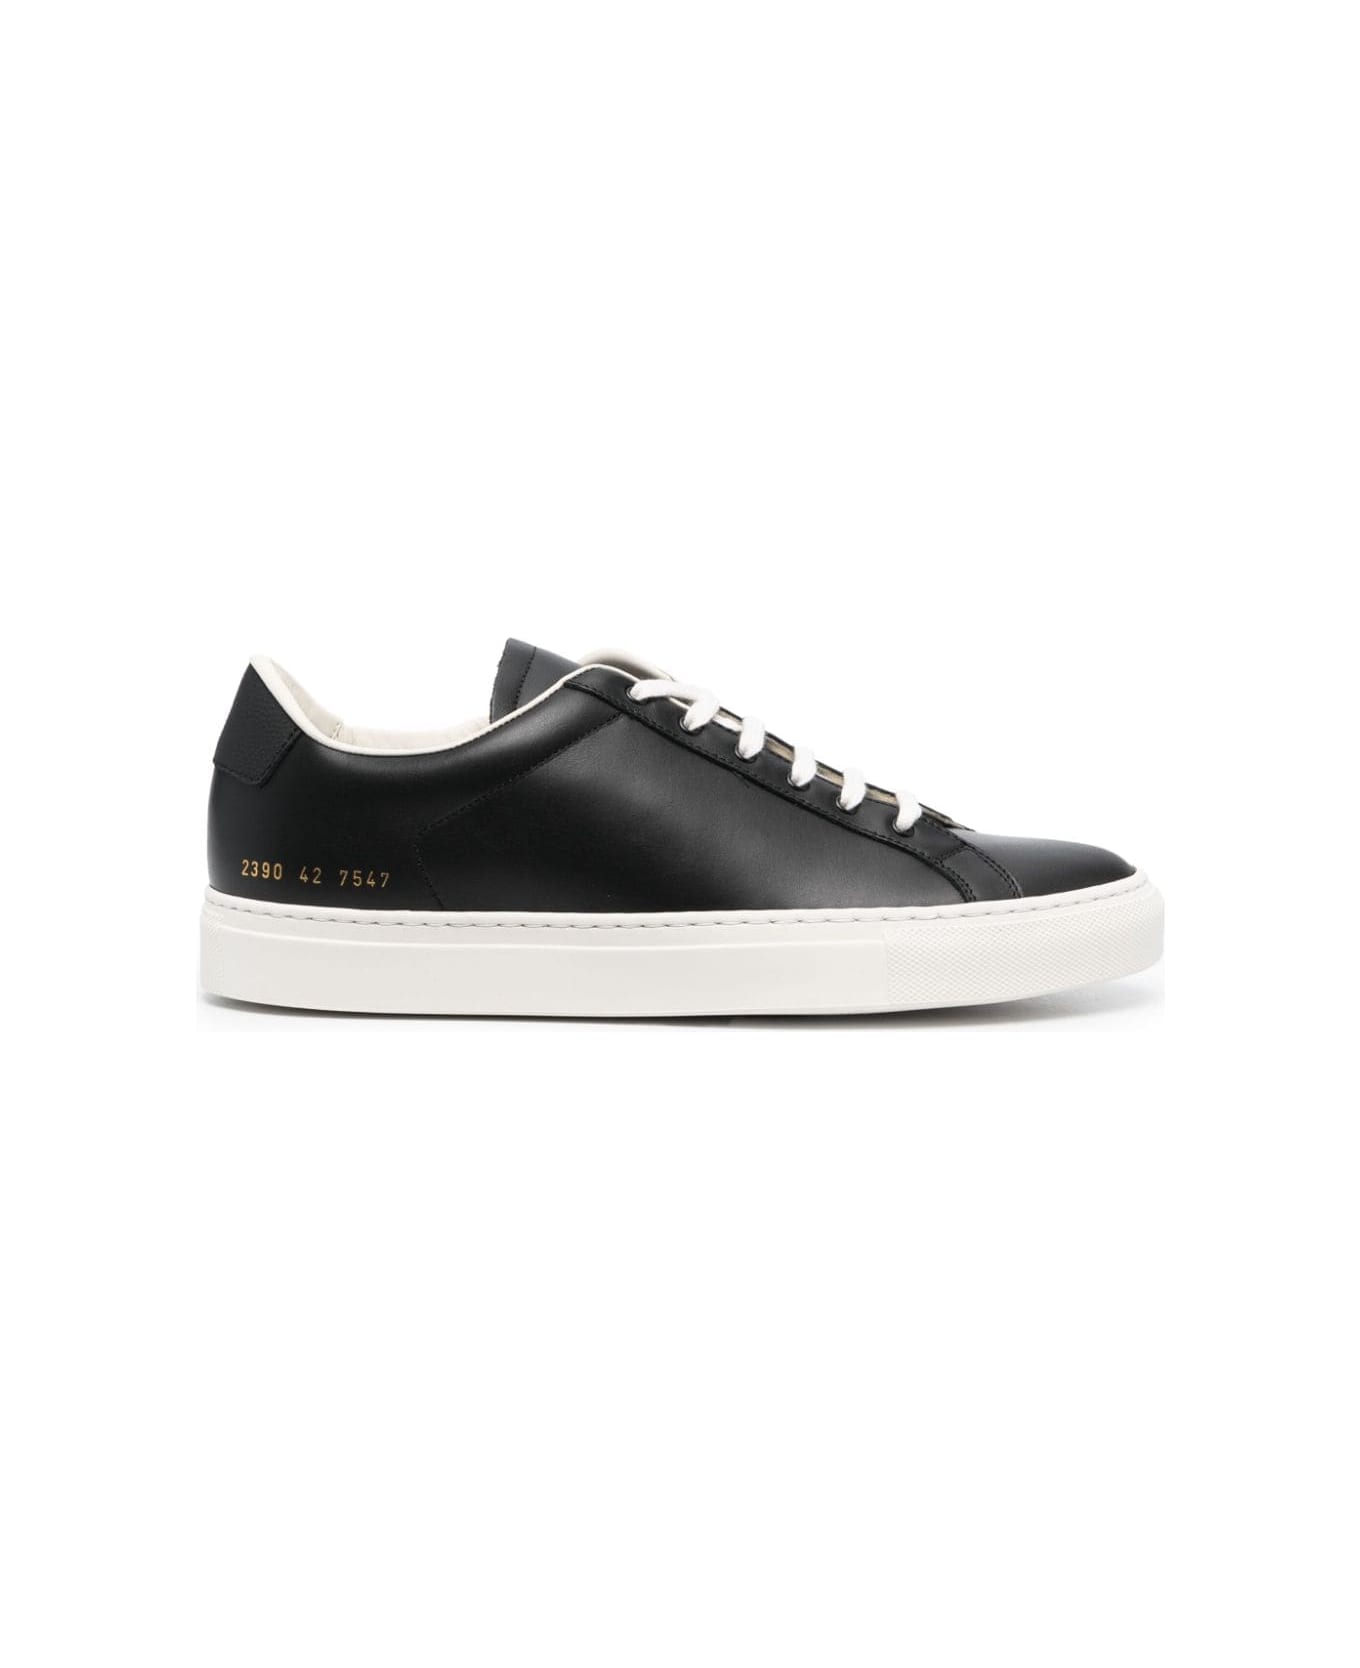 Common Projects 2390 Retro Sneakers - Black